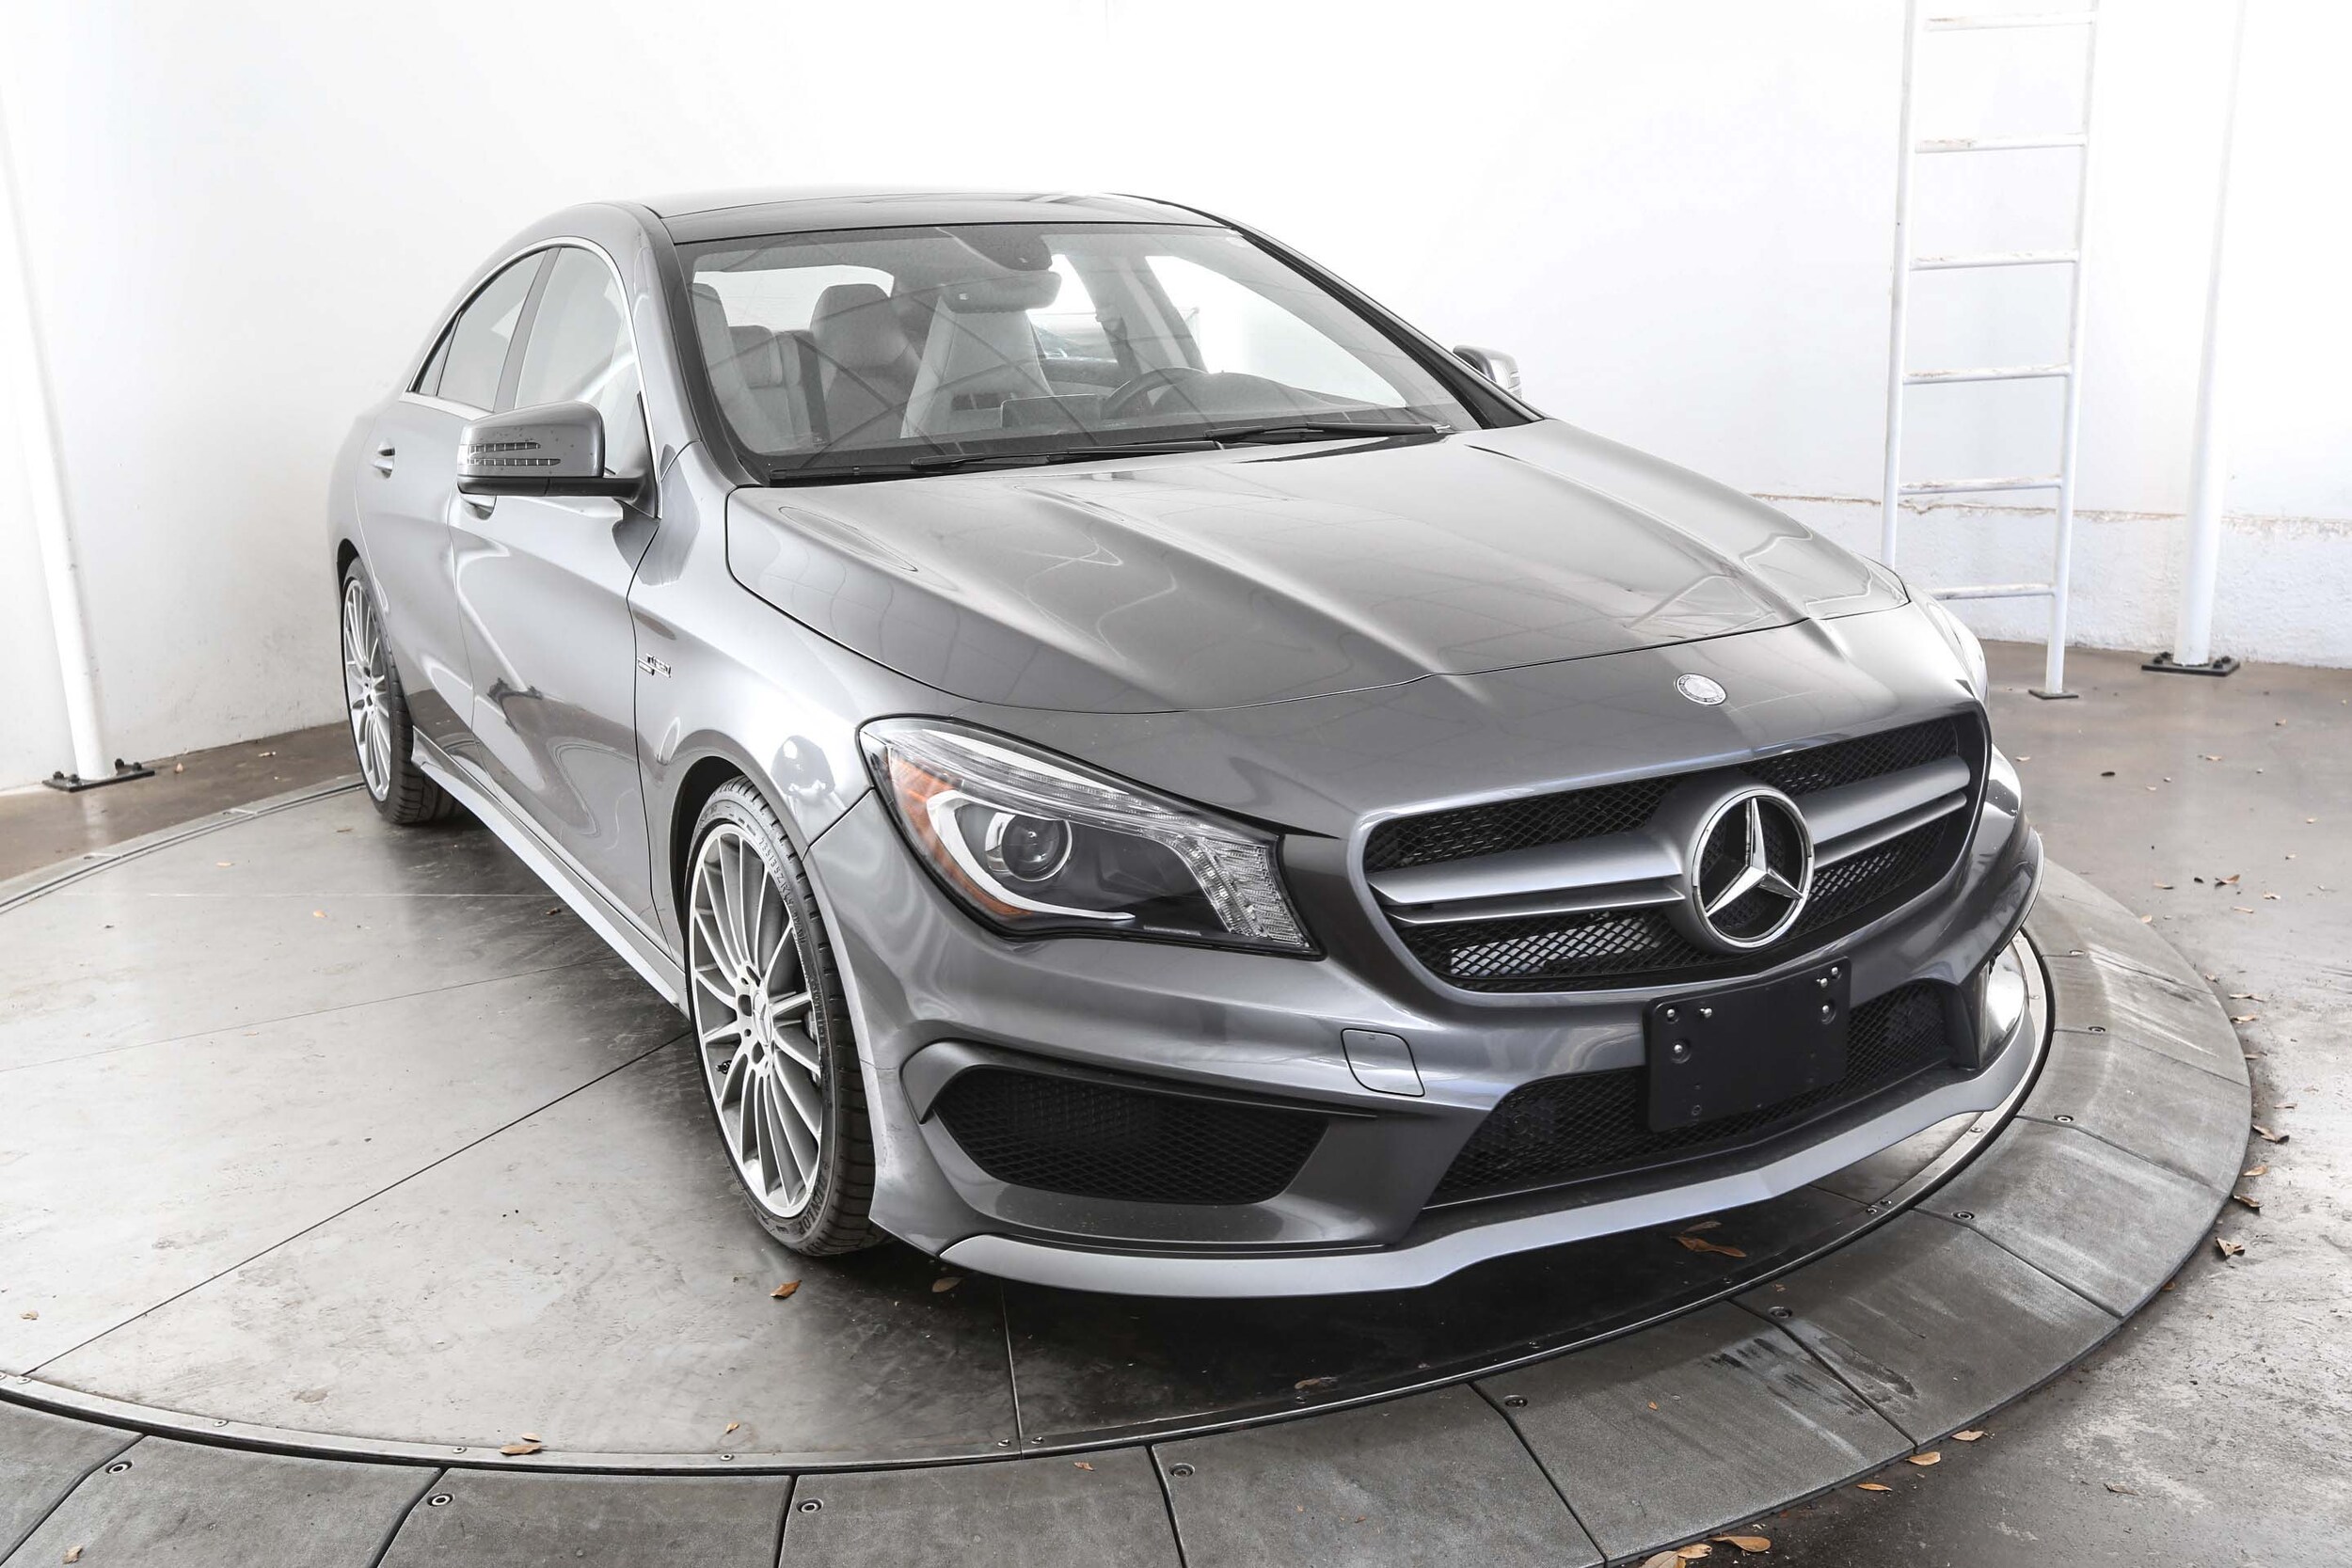 Used mercedes benz for sale in austin #1